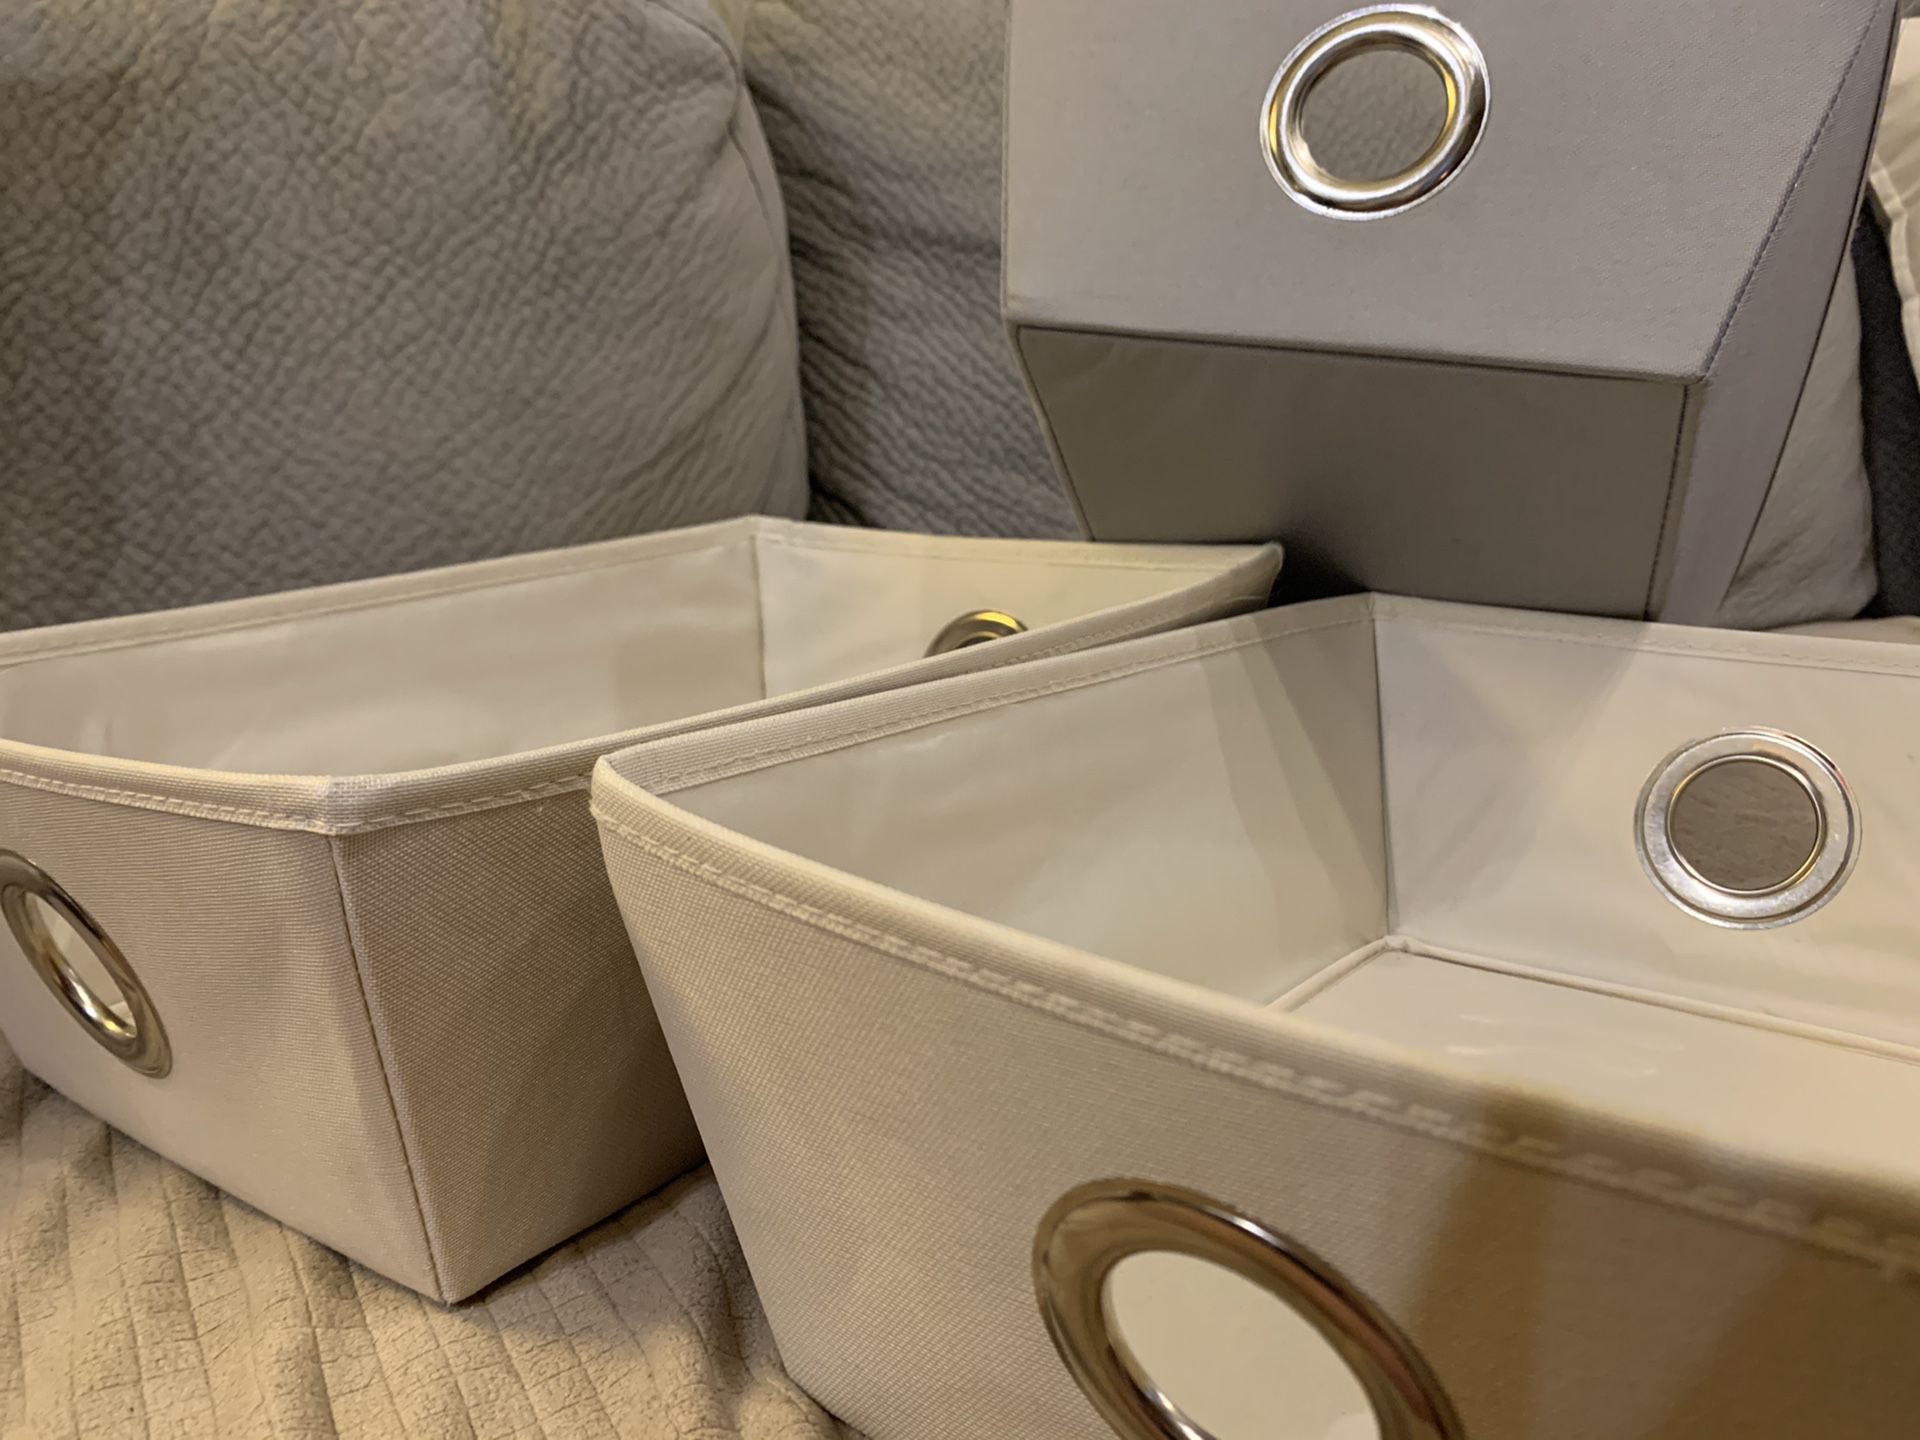 Three stackable storage bin/ containers